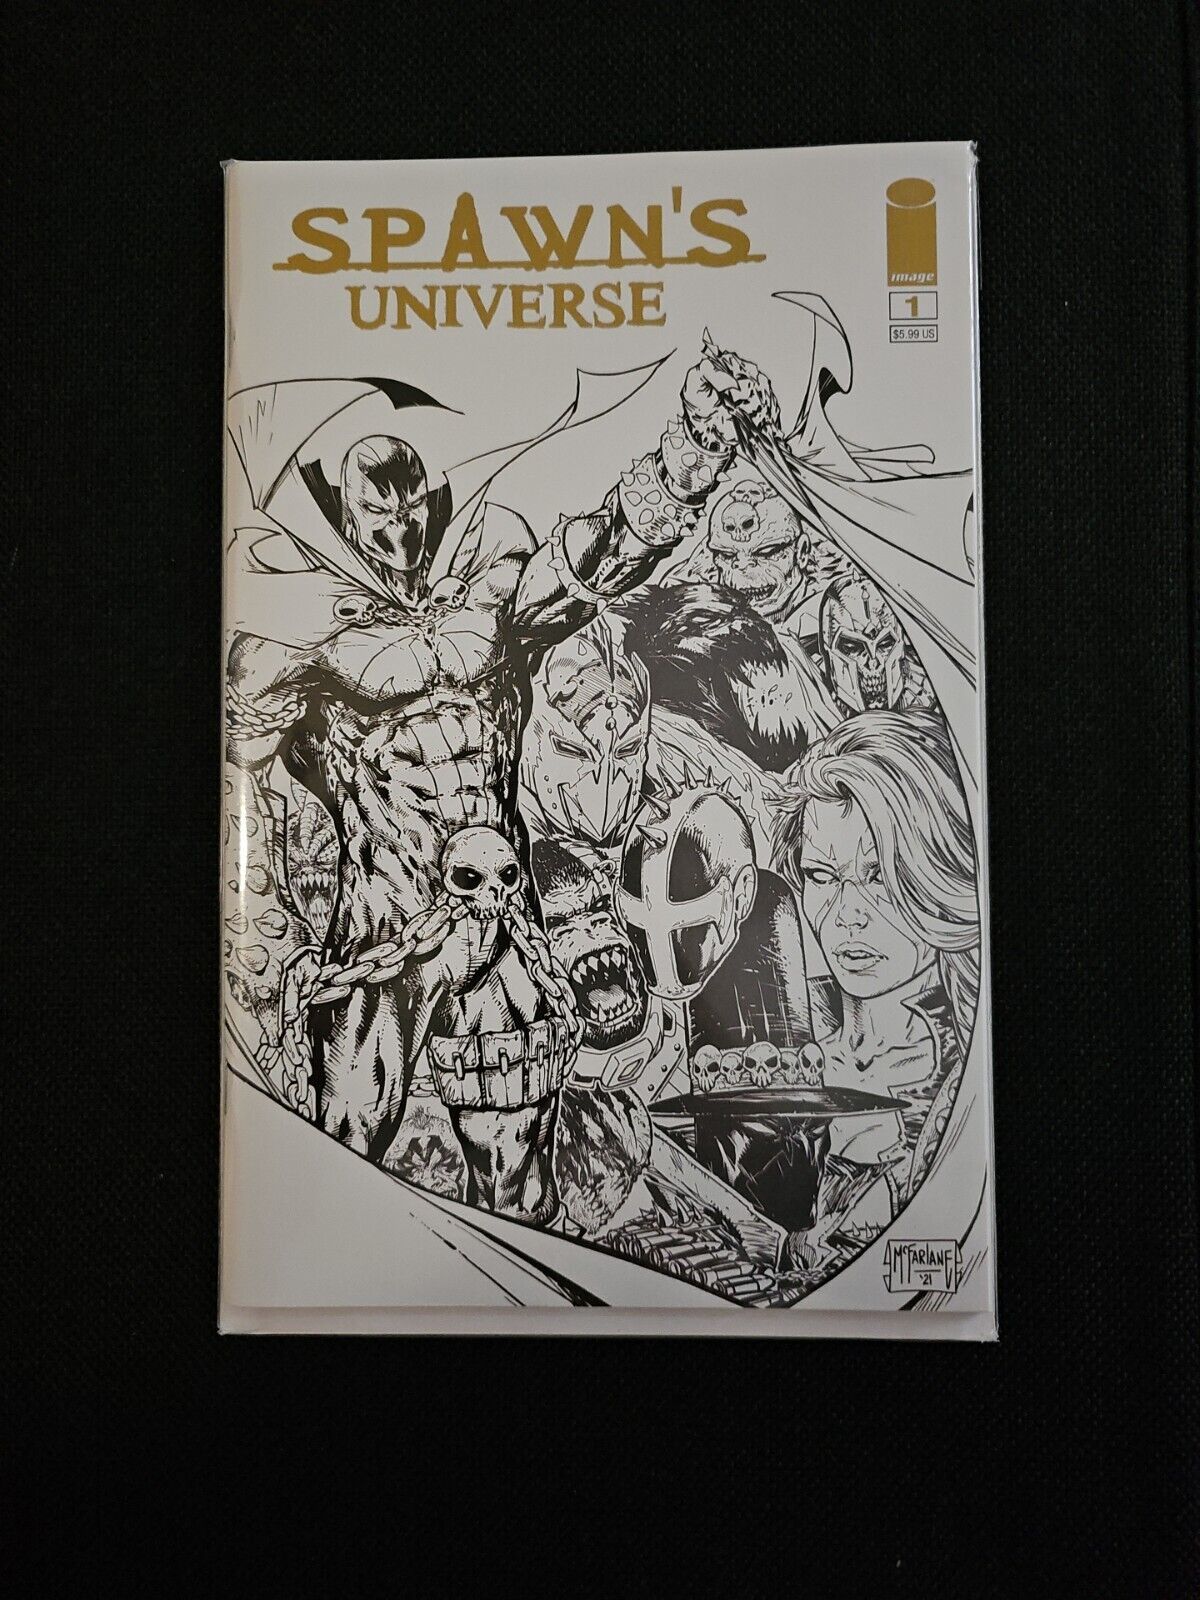 SPAWN'S UNIVERSE #1 Exclusive McFarlane Toys Gold Foil Variant Never Opened